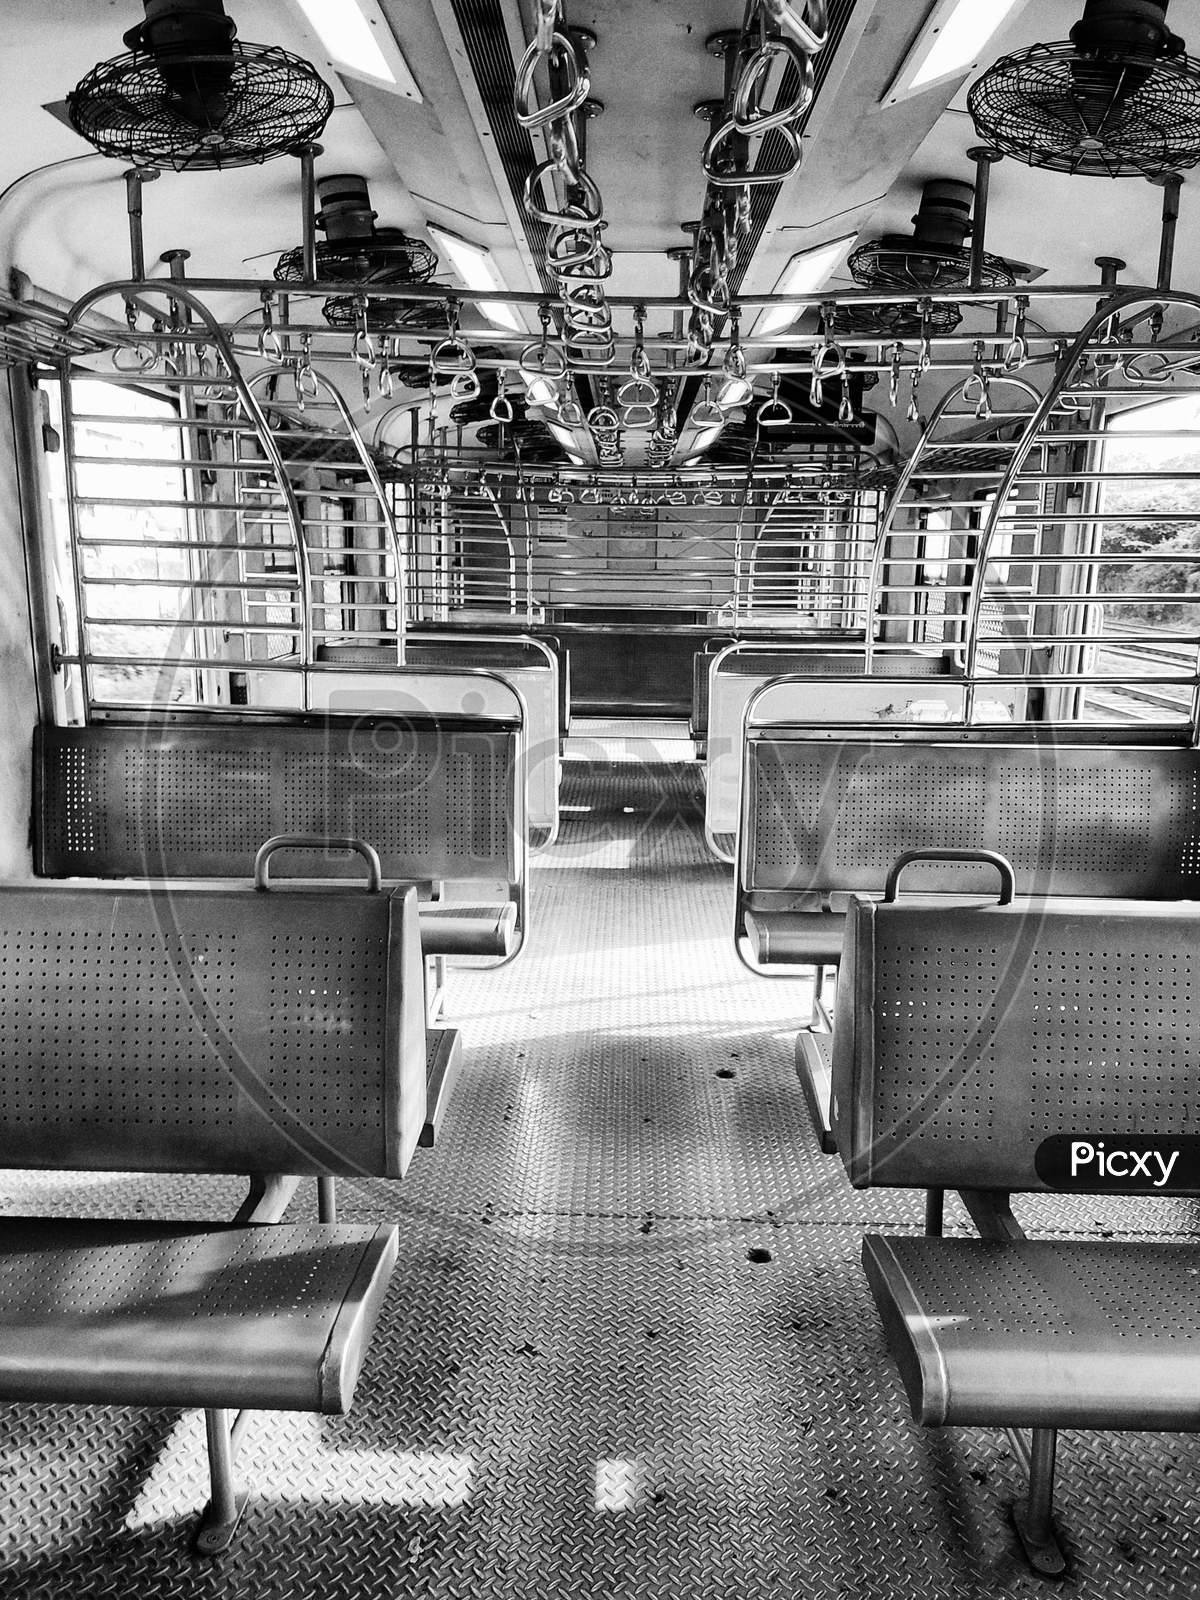 Mumbai Train compartment without people during COVID19 Lockdown in Maharashtra, India